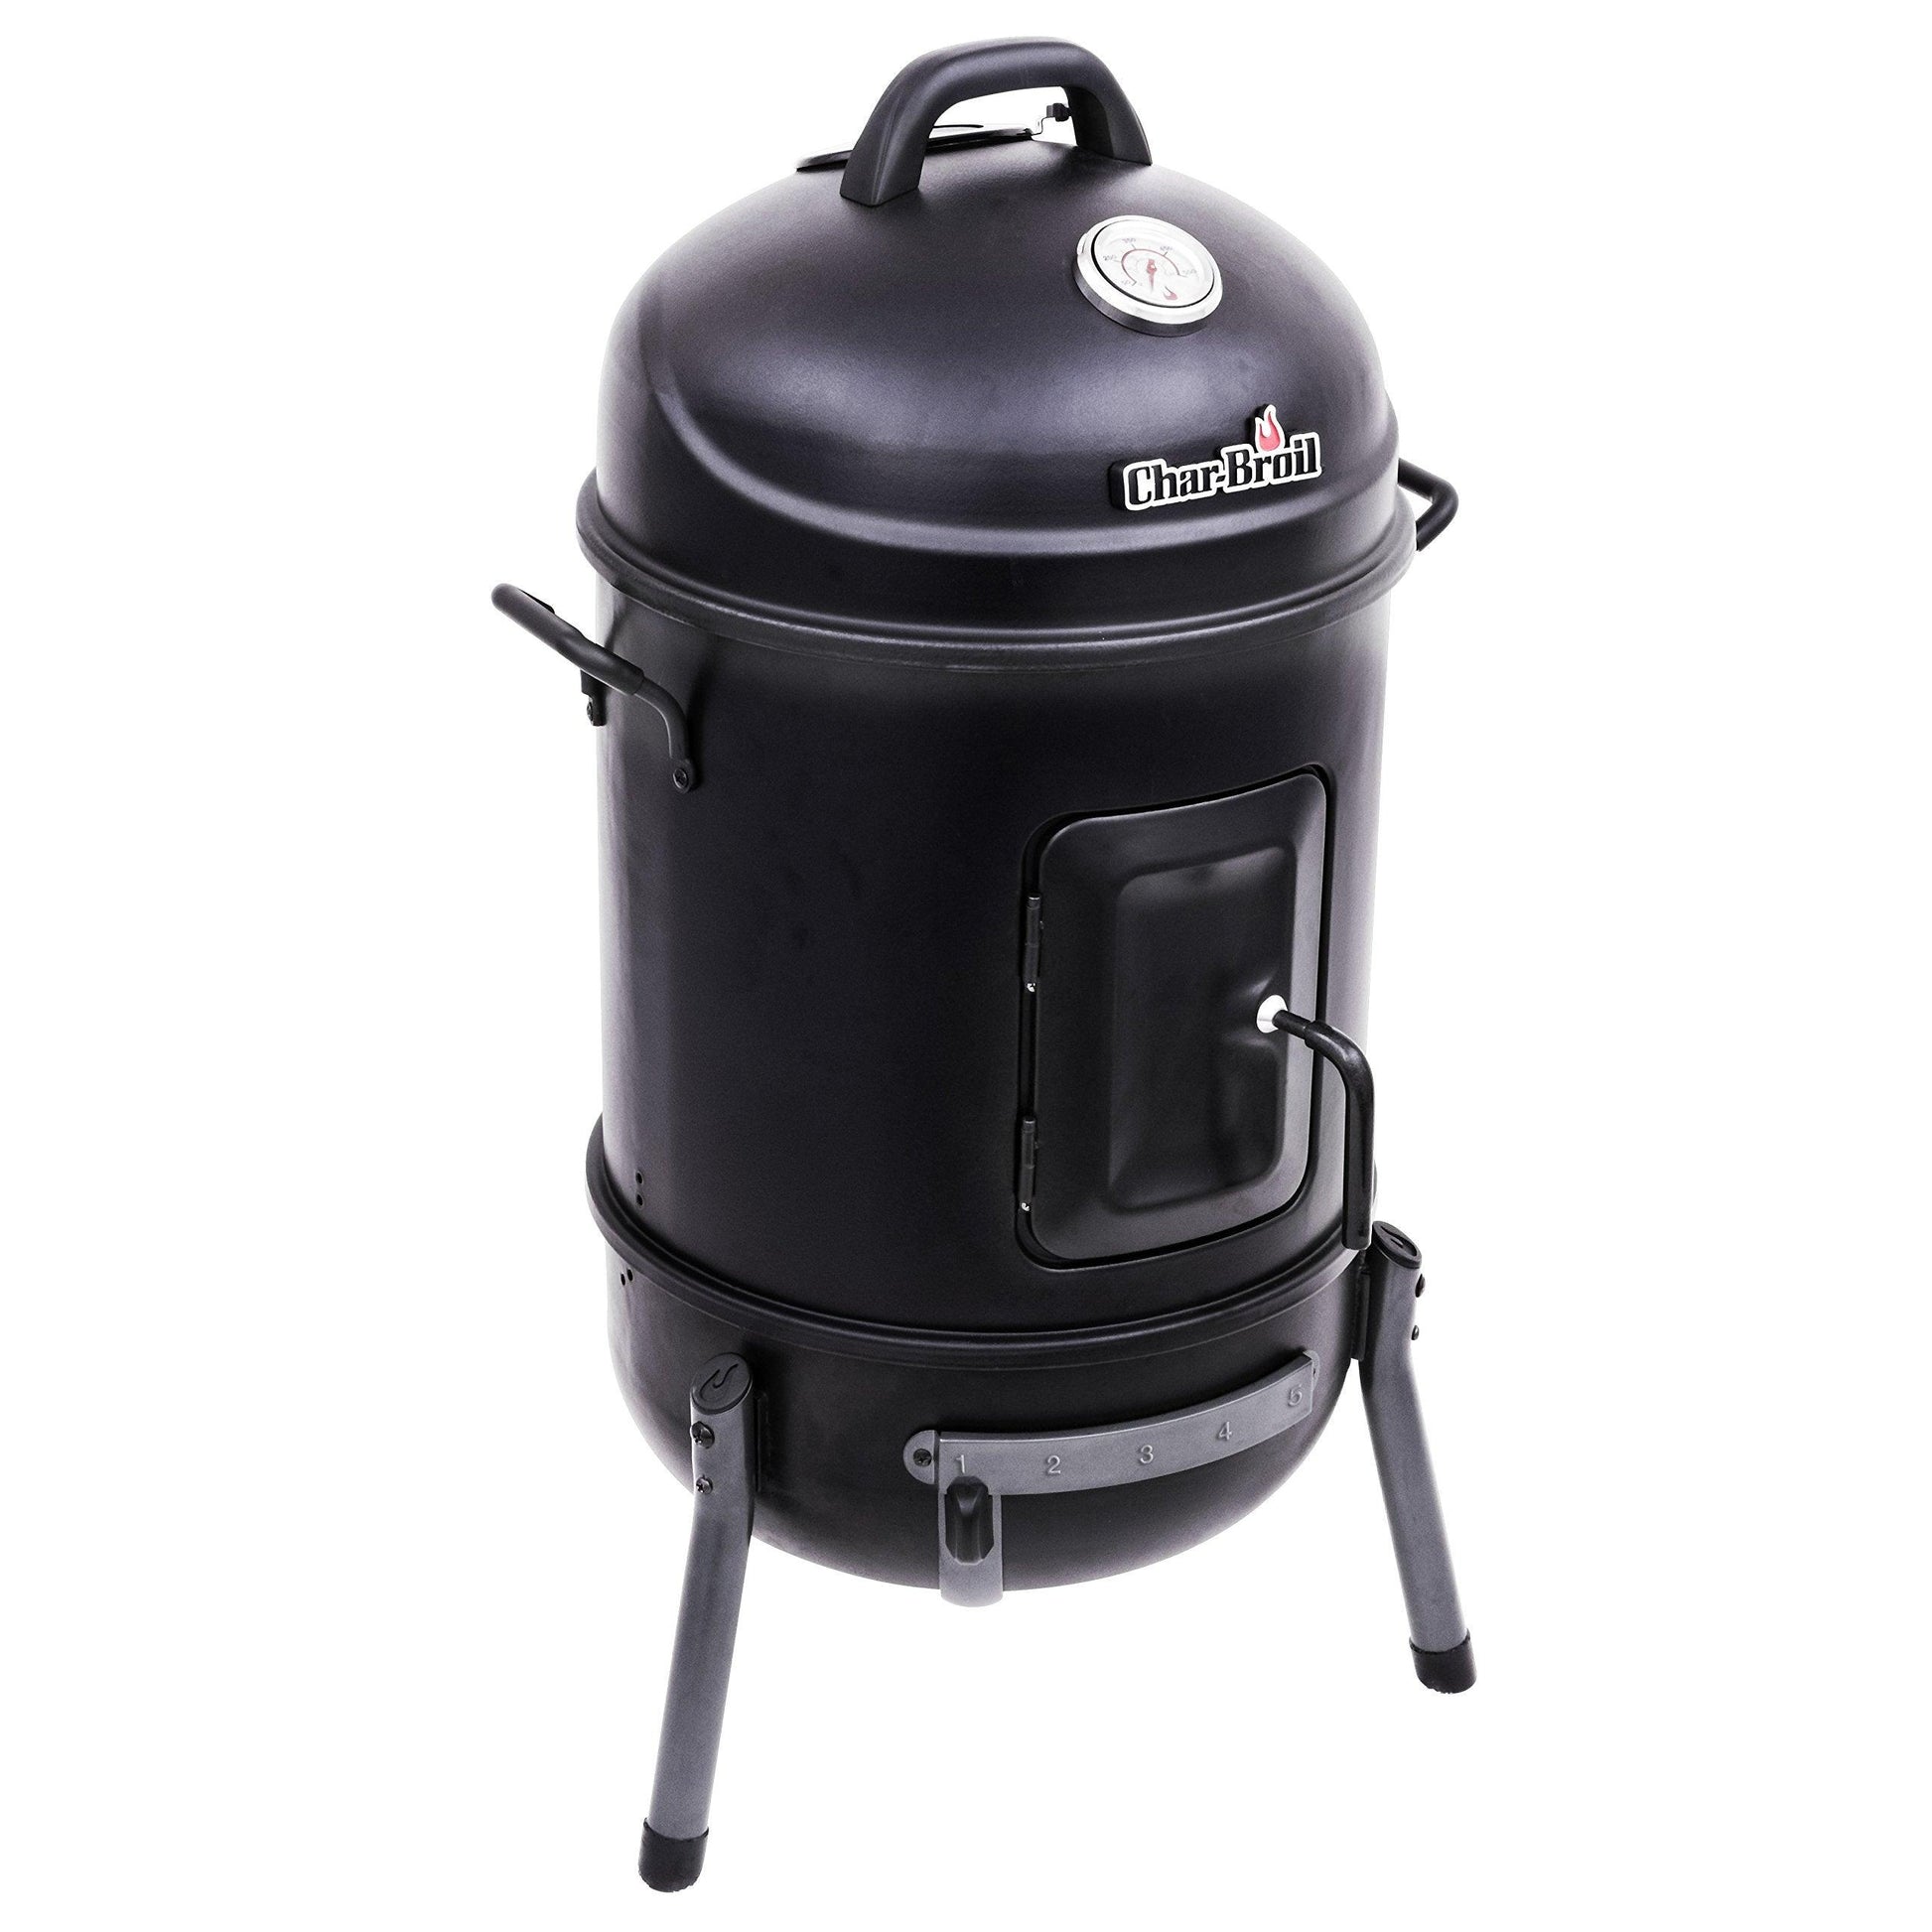 Char-Broil Bullet Charcoal Smoker 16" - 18202075,Black - CookCave